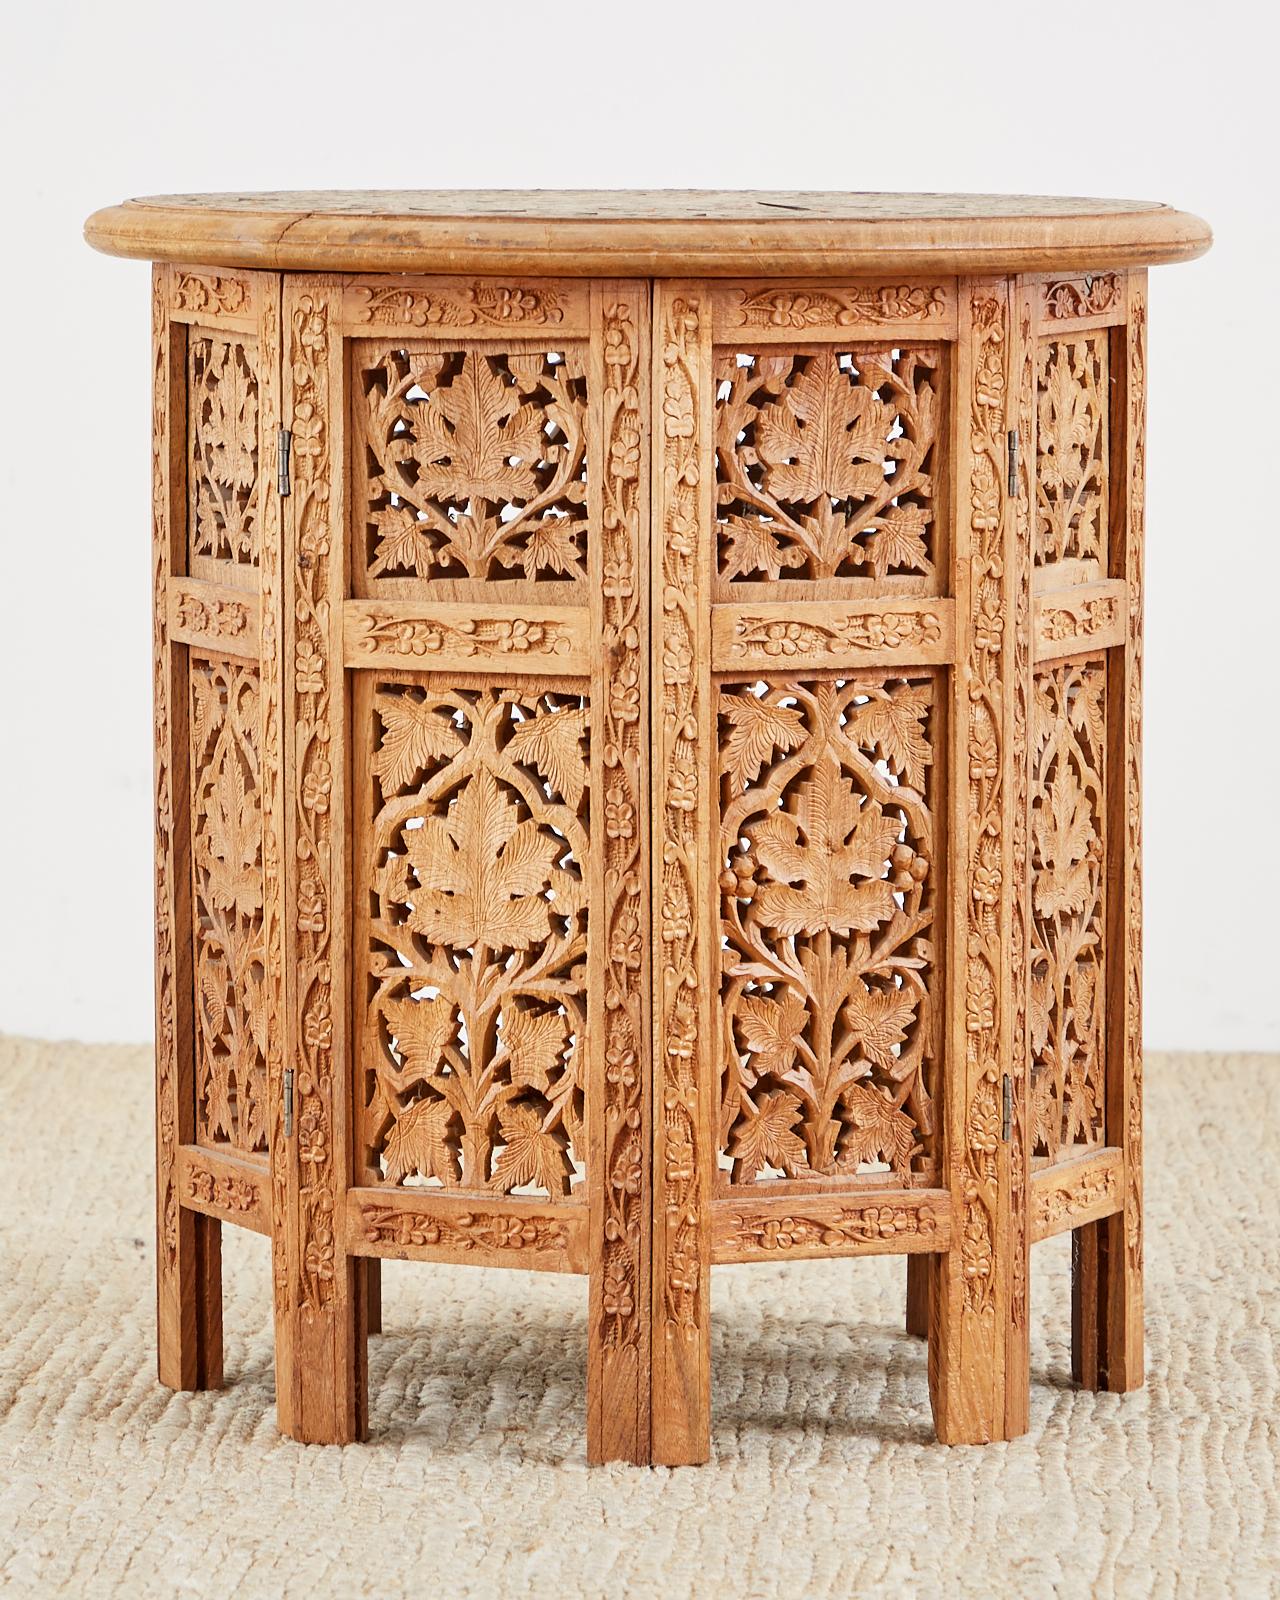 Octagonal carved teak tabouret style Moroccan side table or drinks table. Featuring foliate design piercings throughout base. The top of the table is round and has a small intricate floral motif mosaic inlay. The campaign style table top is